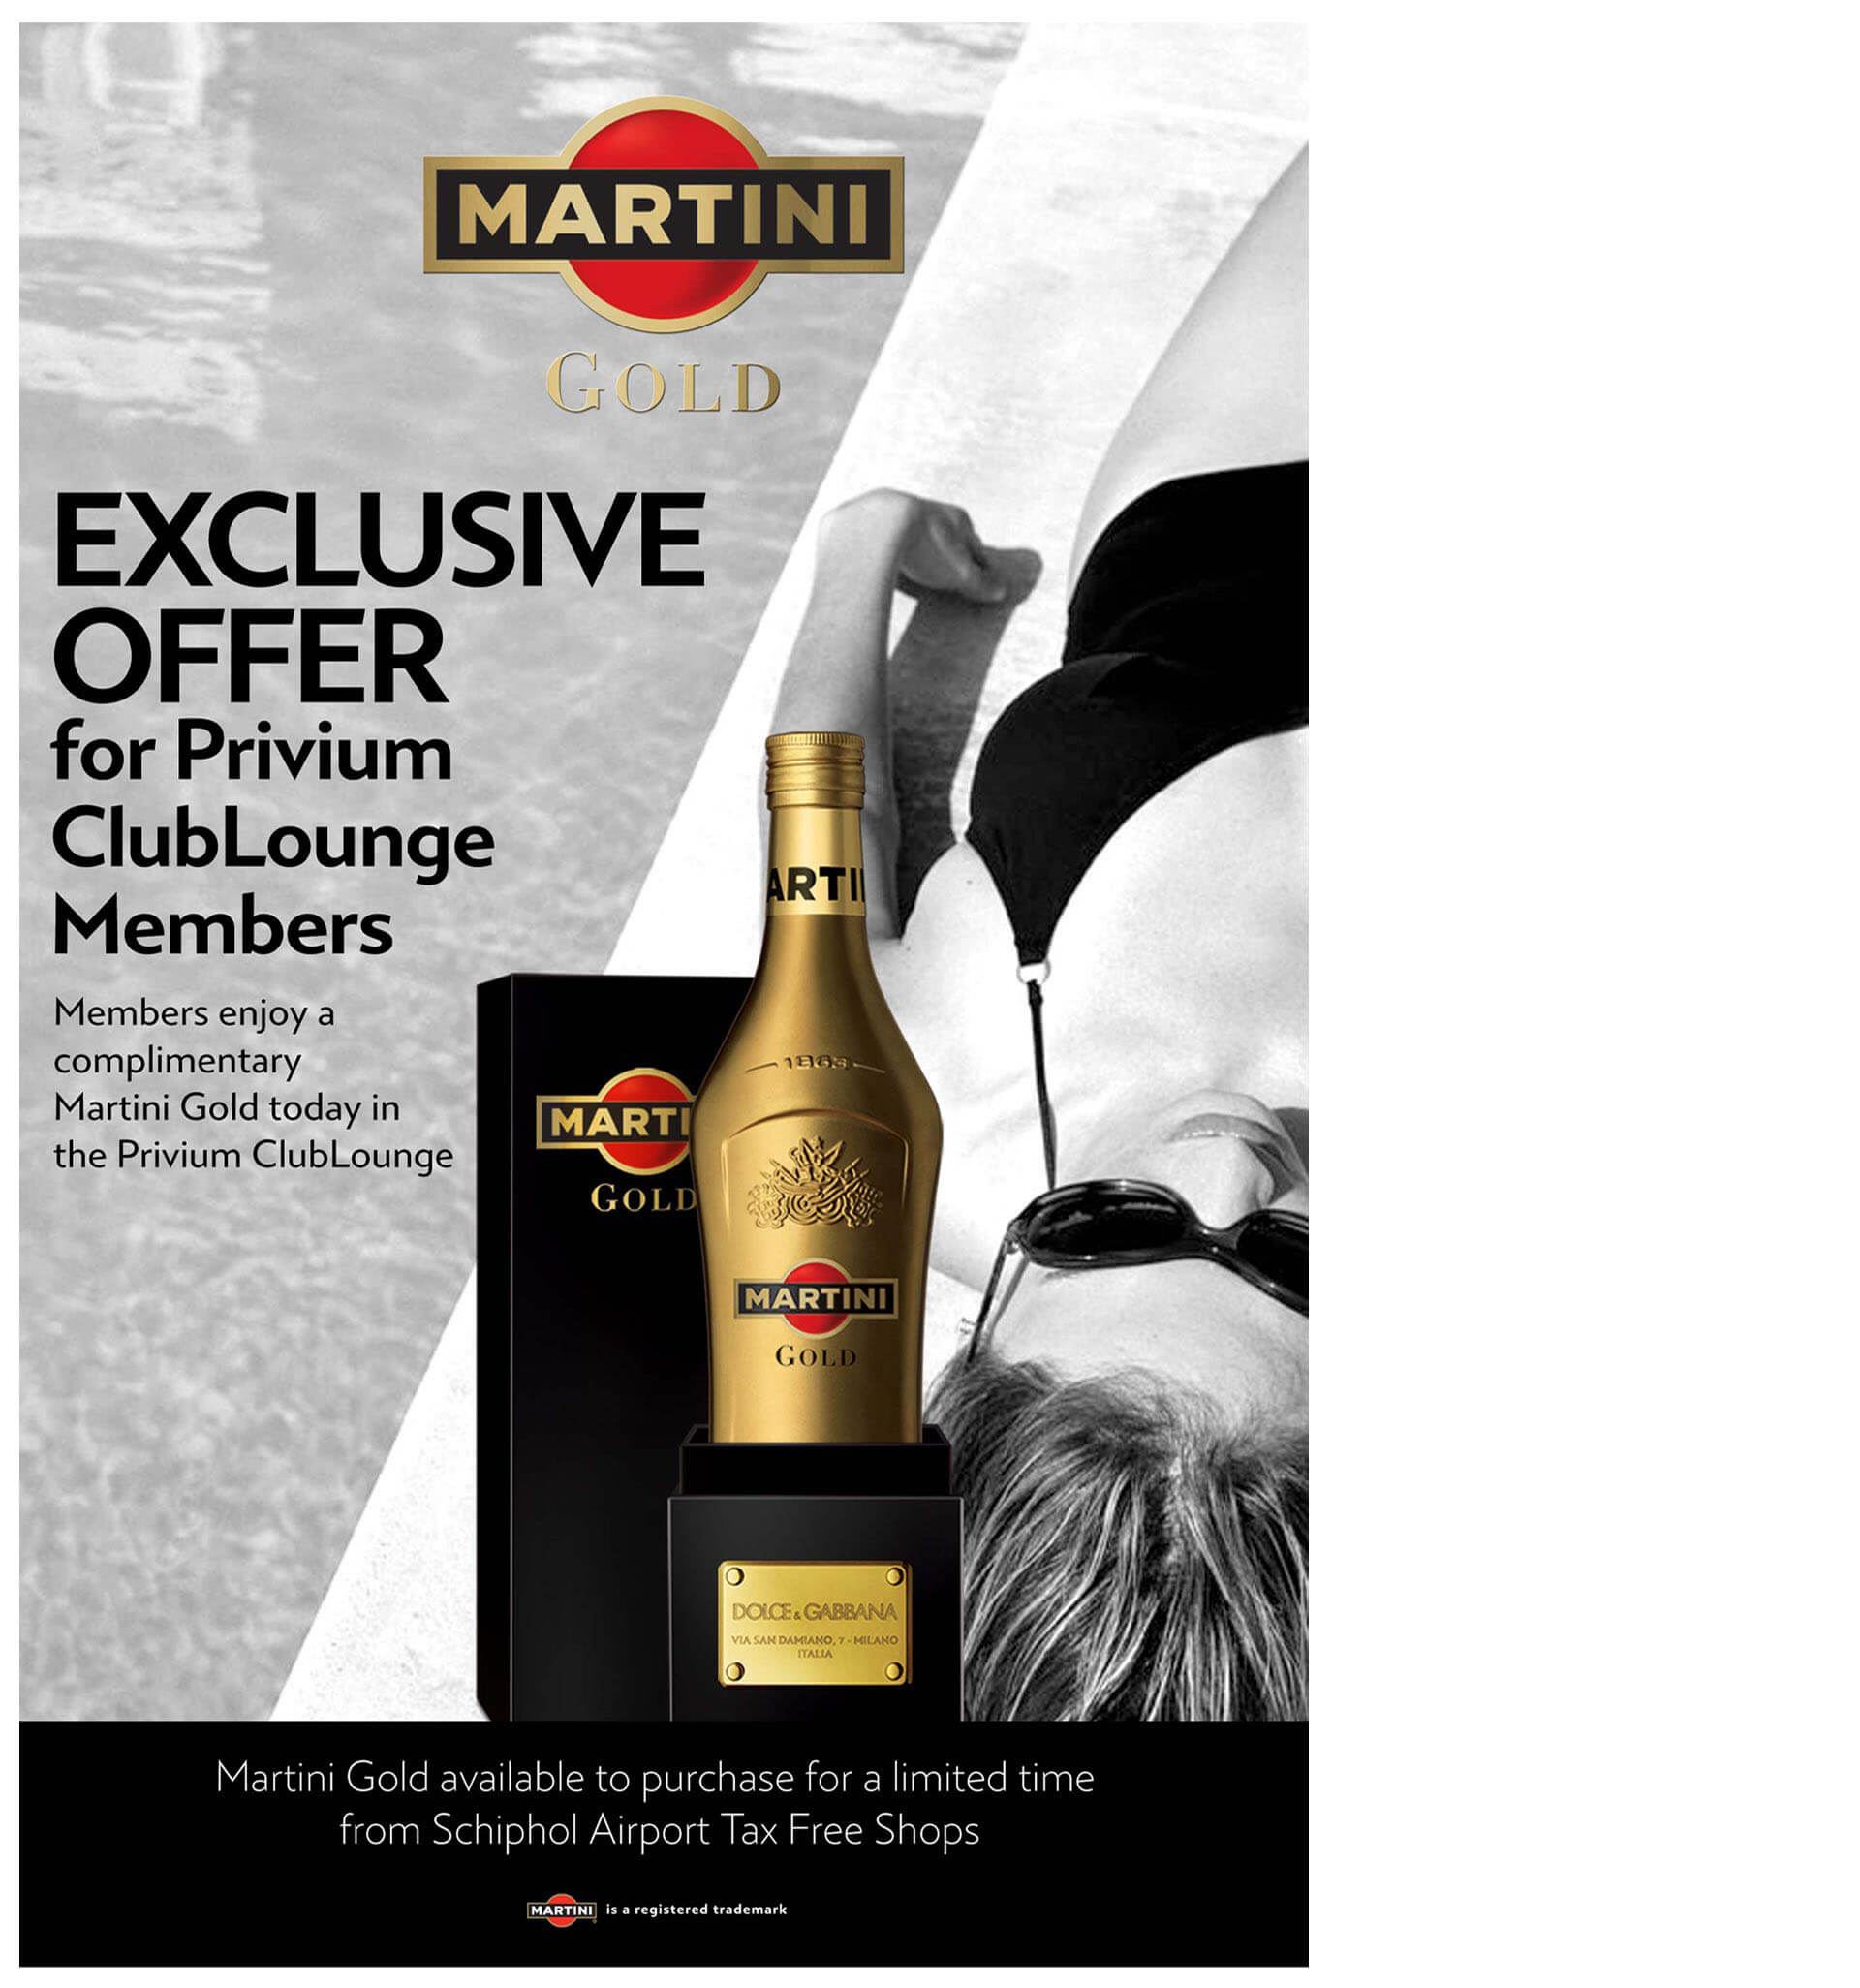 Martini Gold the new taste Dolce & Gabbana brand identity, Privium ClubLounge drinks promotion photography for Bacardi Global Travel Retail